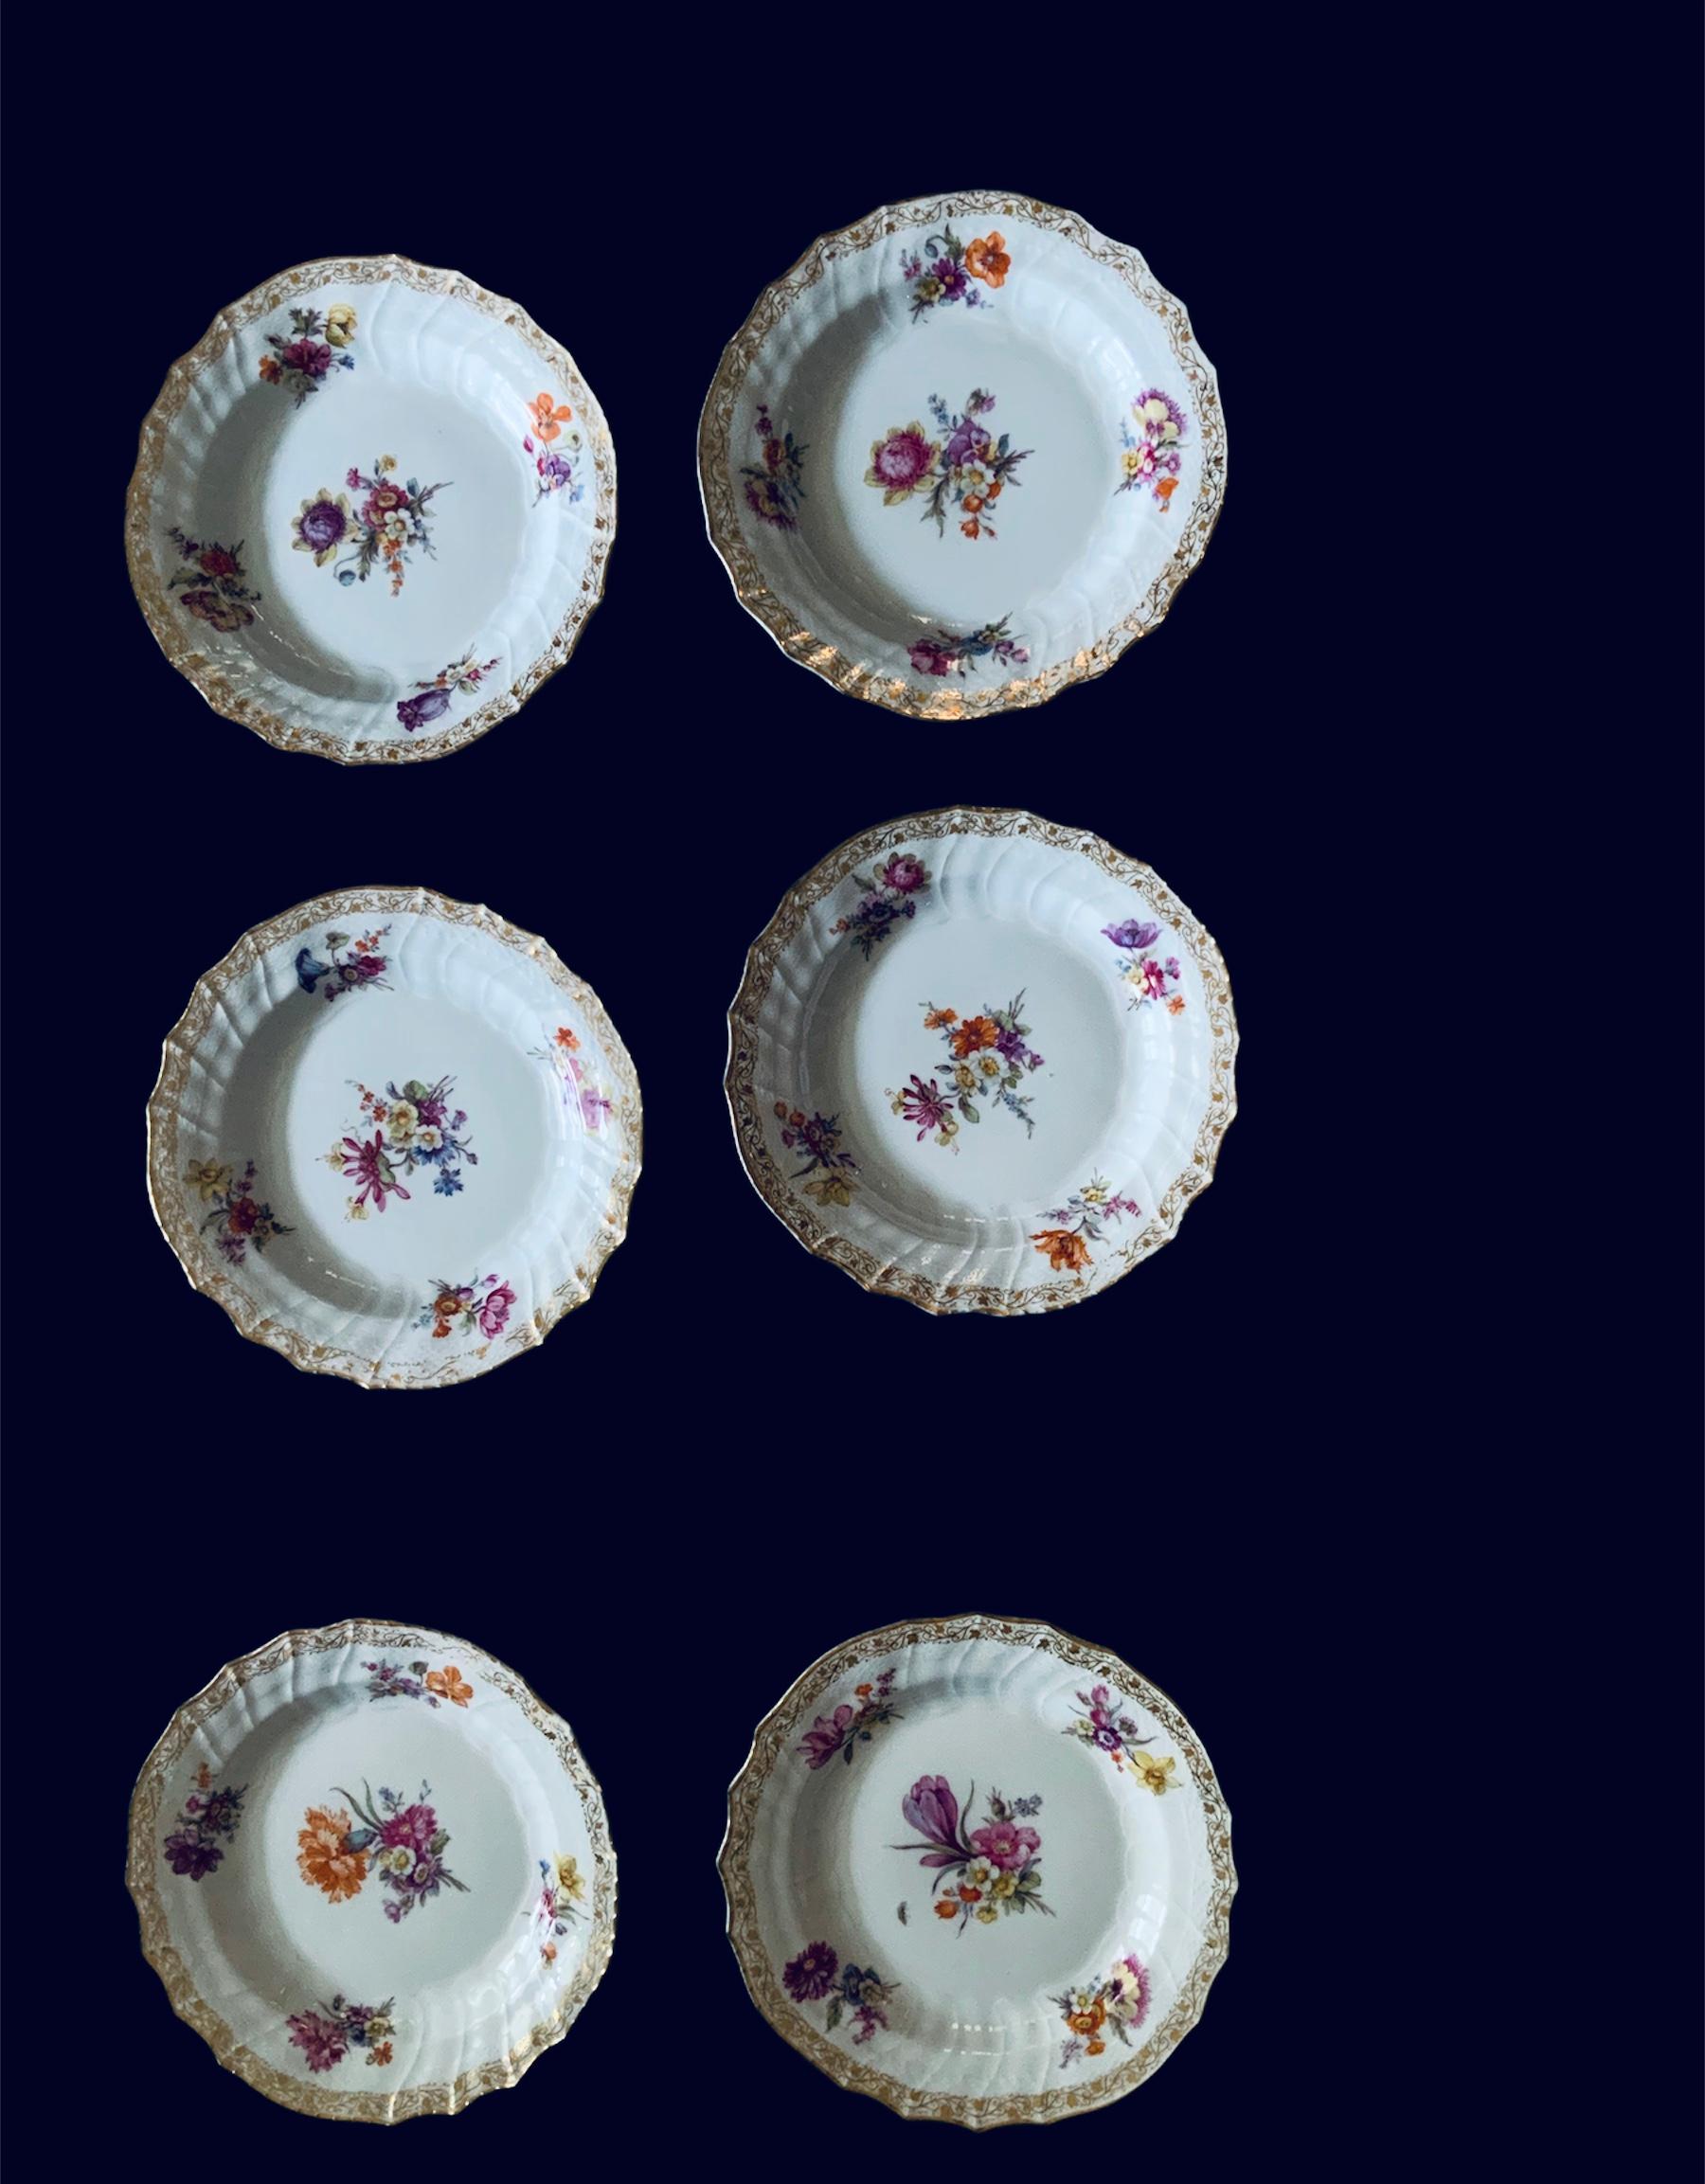 This is a set of six KPM bread and butter plates. They depicts a bouquet of flowers in the center and four different small bouquets around the border. There is also some gilt vine of hearts and Ivy leaves adorning the border in addition of the